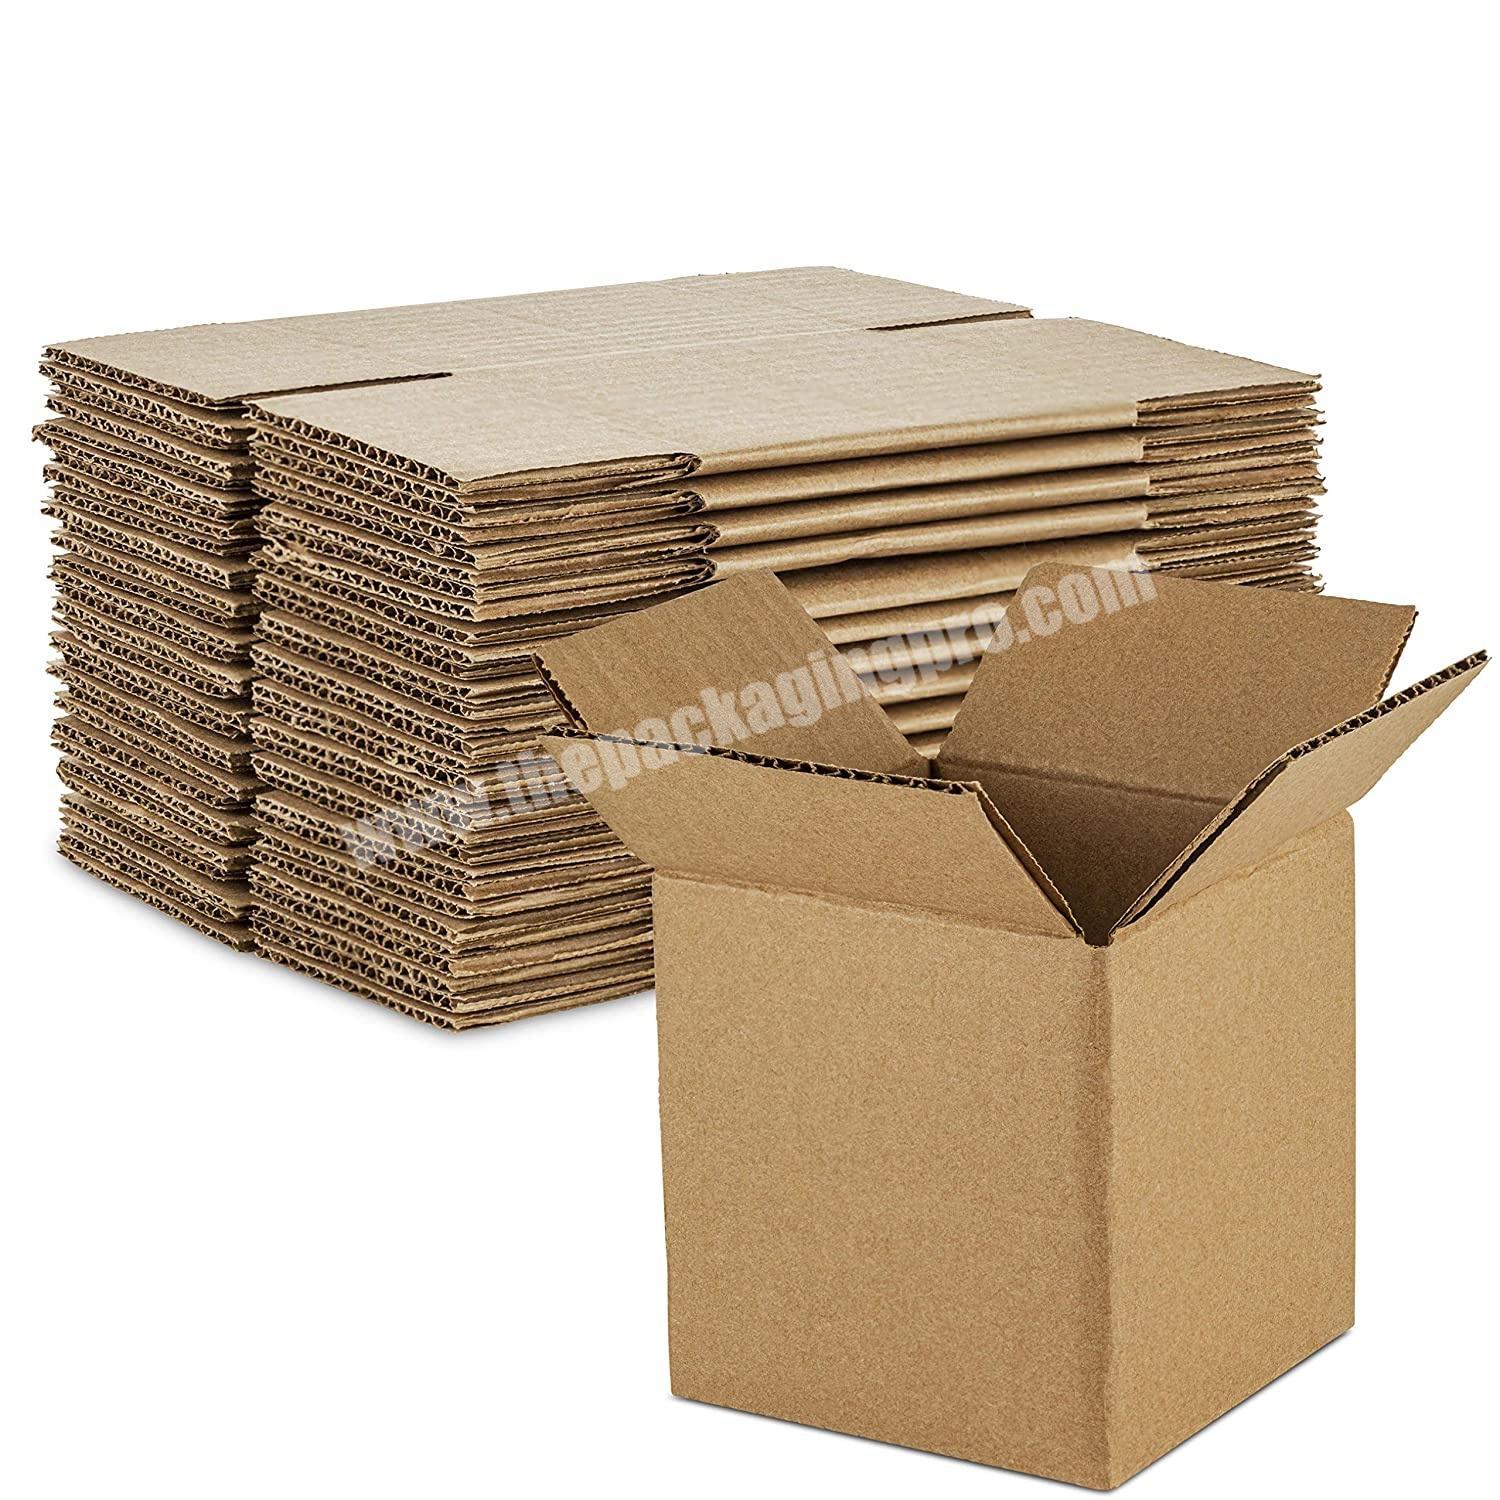 Sturdy Kraft Corrugated Cardboard Boxes for Shipping and Mailing